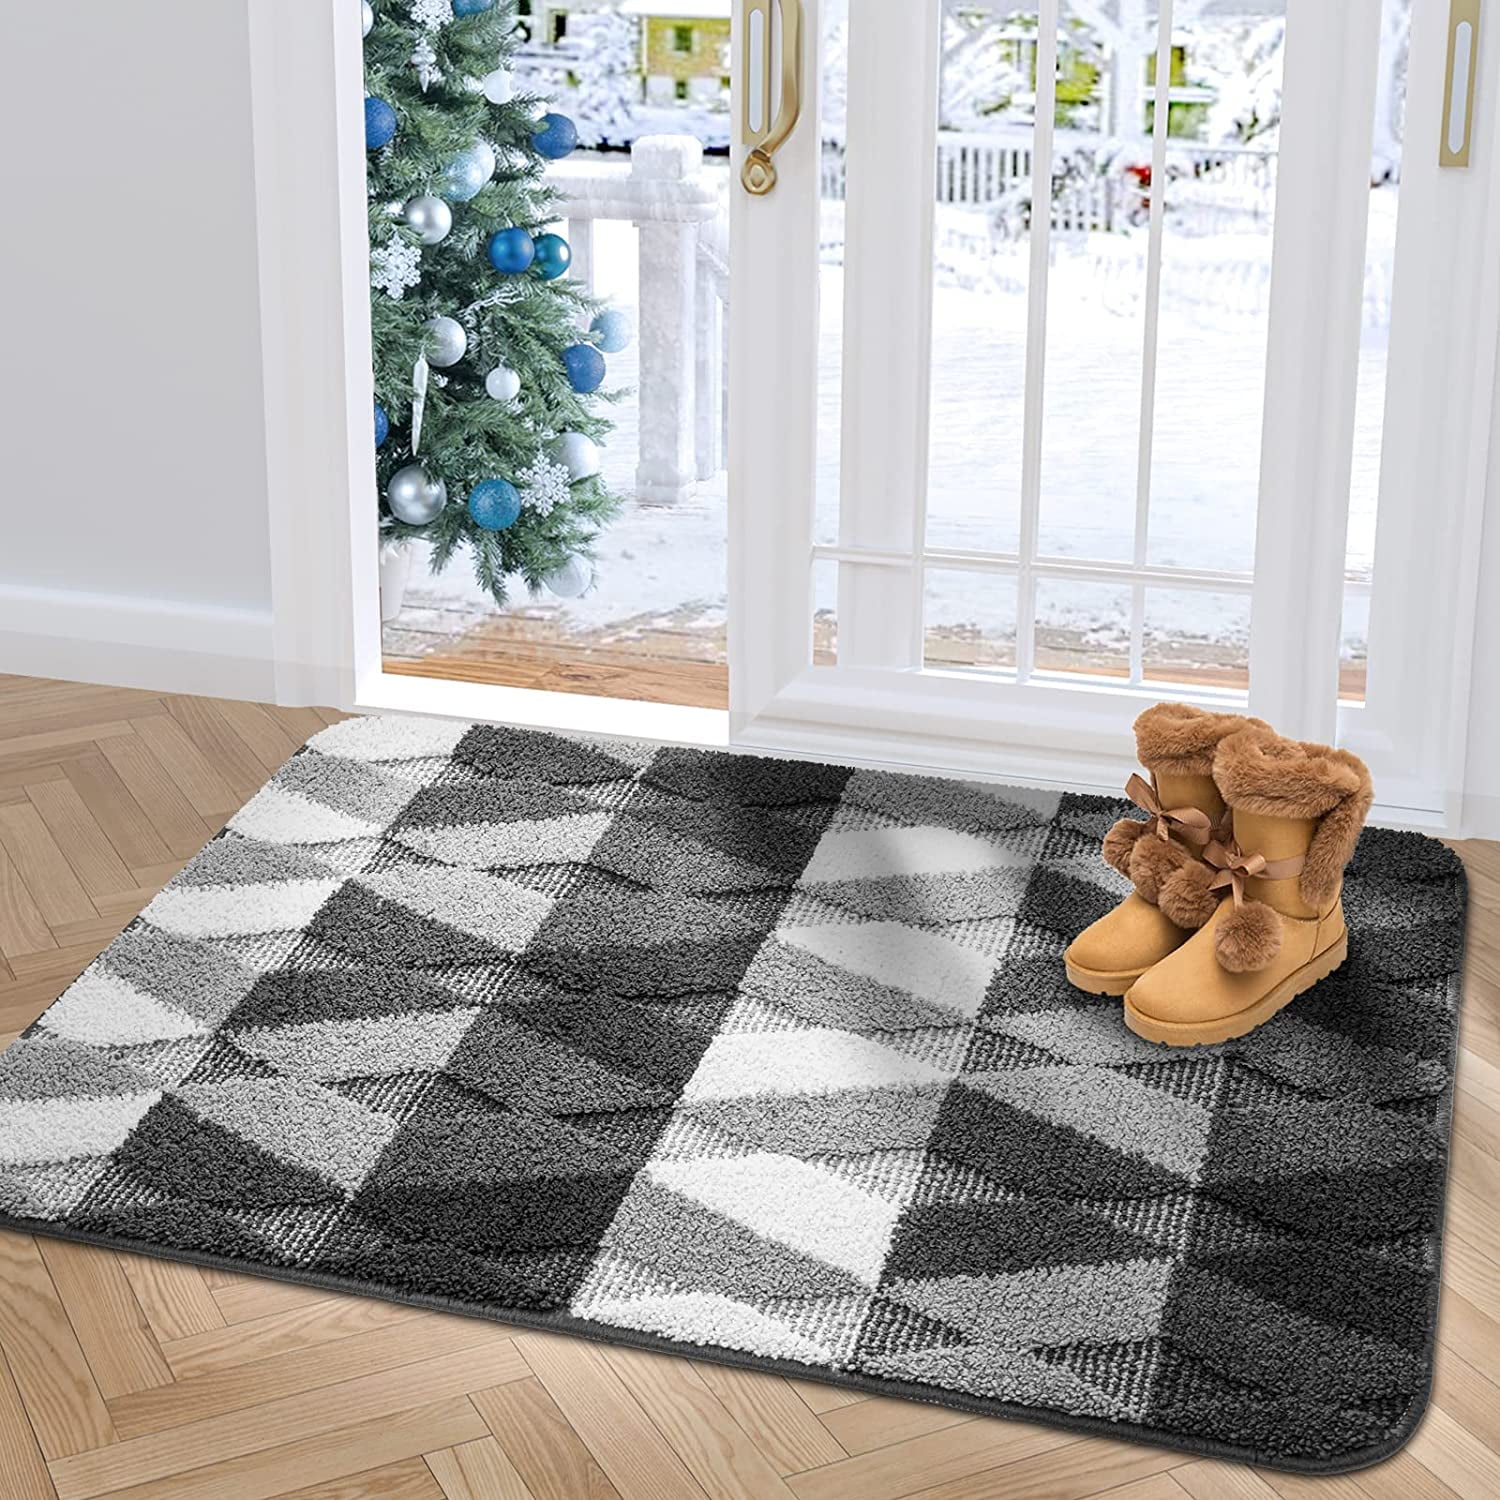 NEW SPACE DESIGNS DOORMAT EXCELENT QUALITY 50X80CM NAVY NON SLIP WASHABLE RUGS 